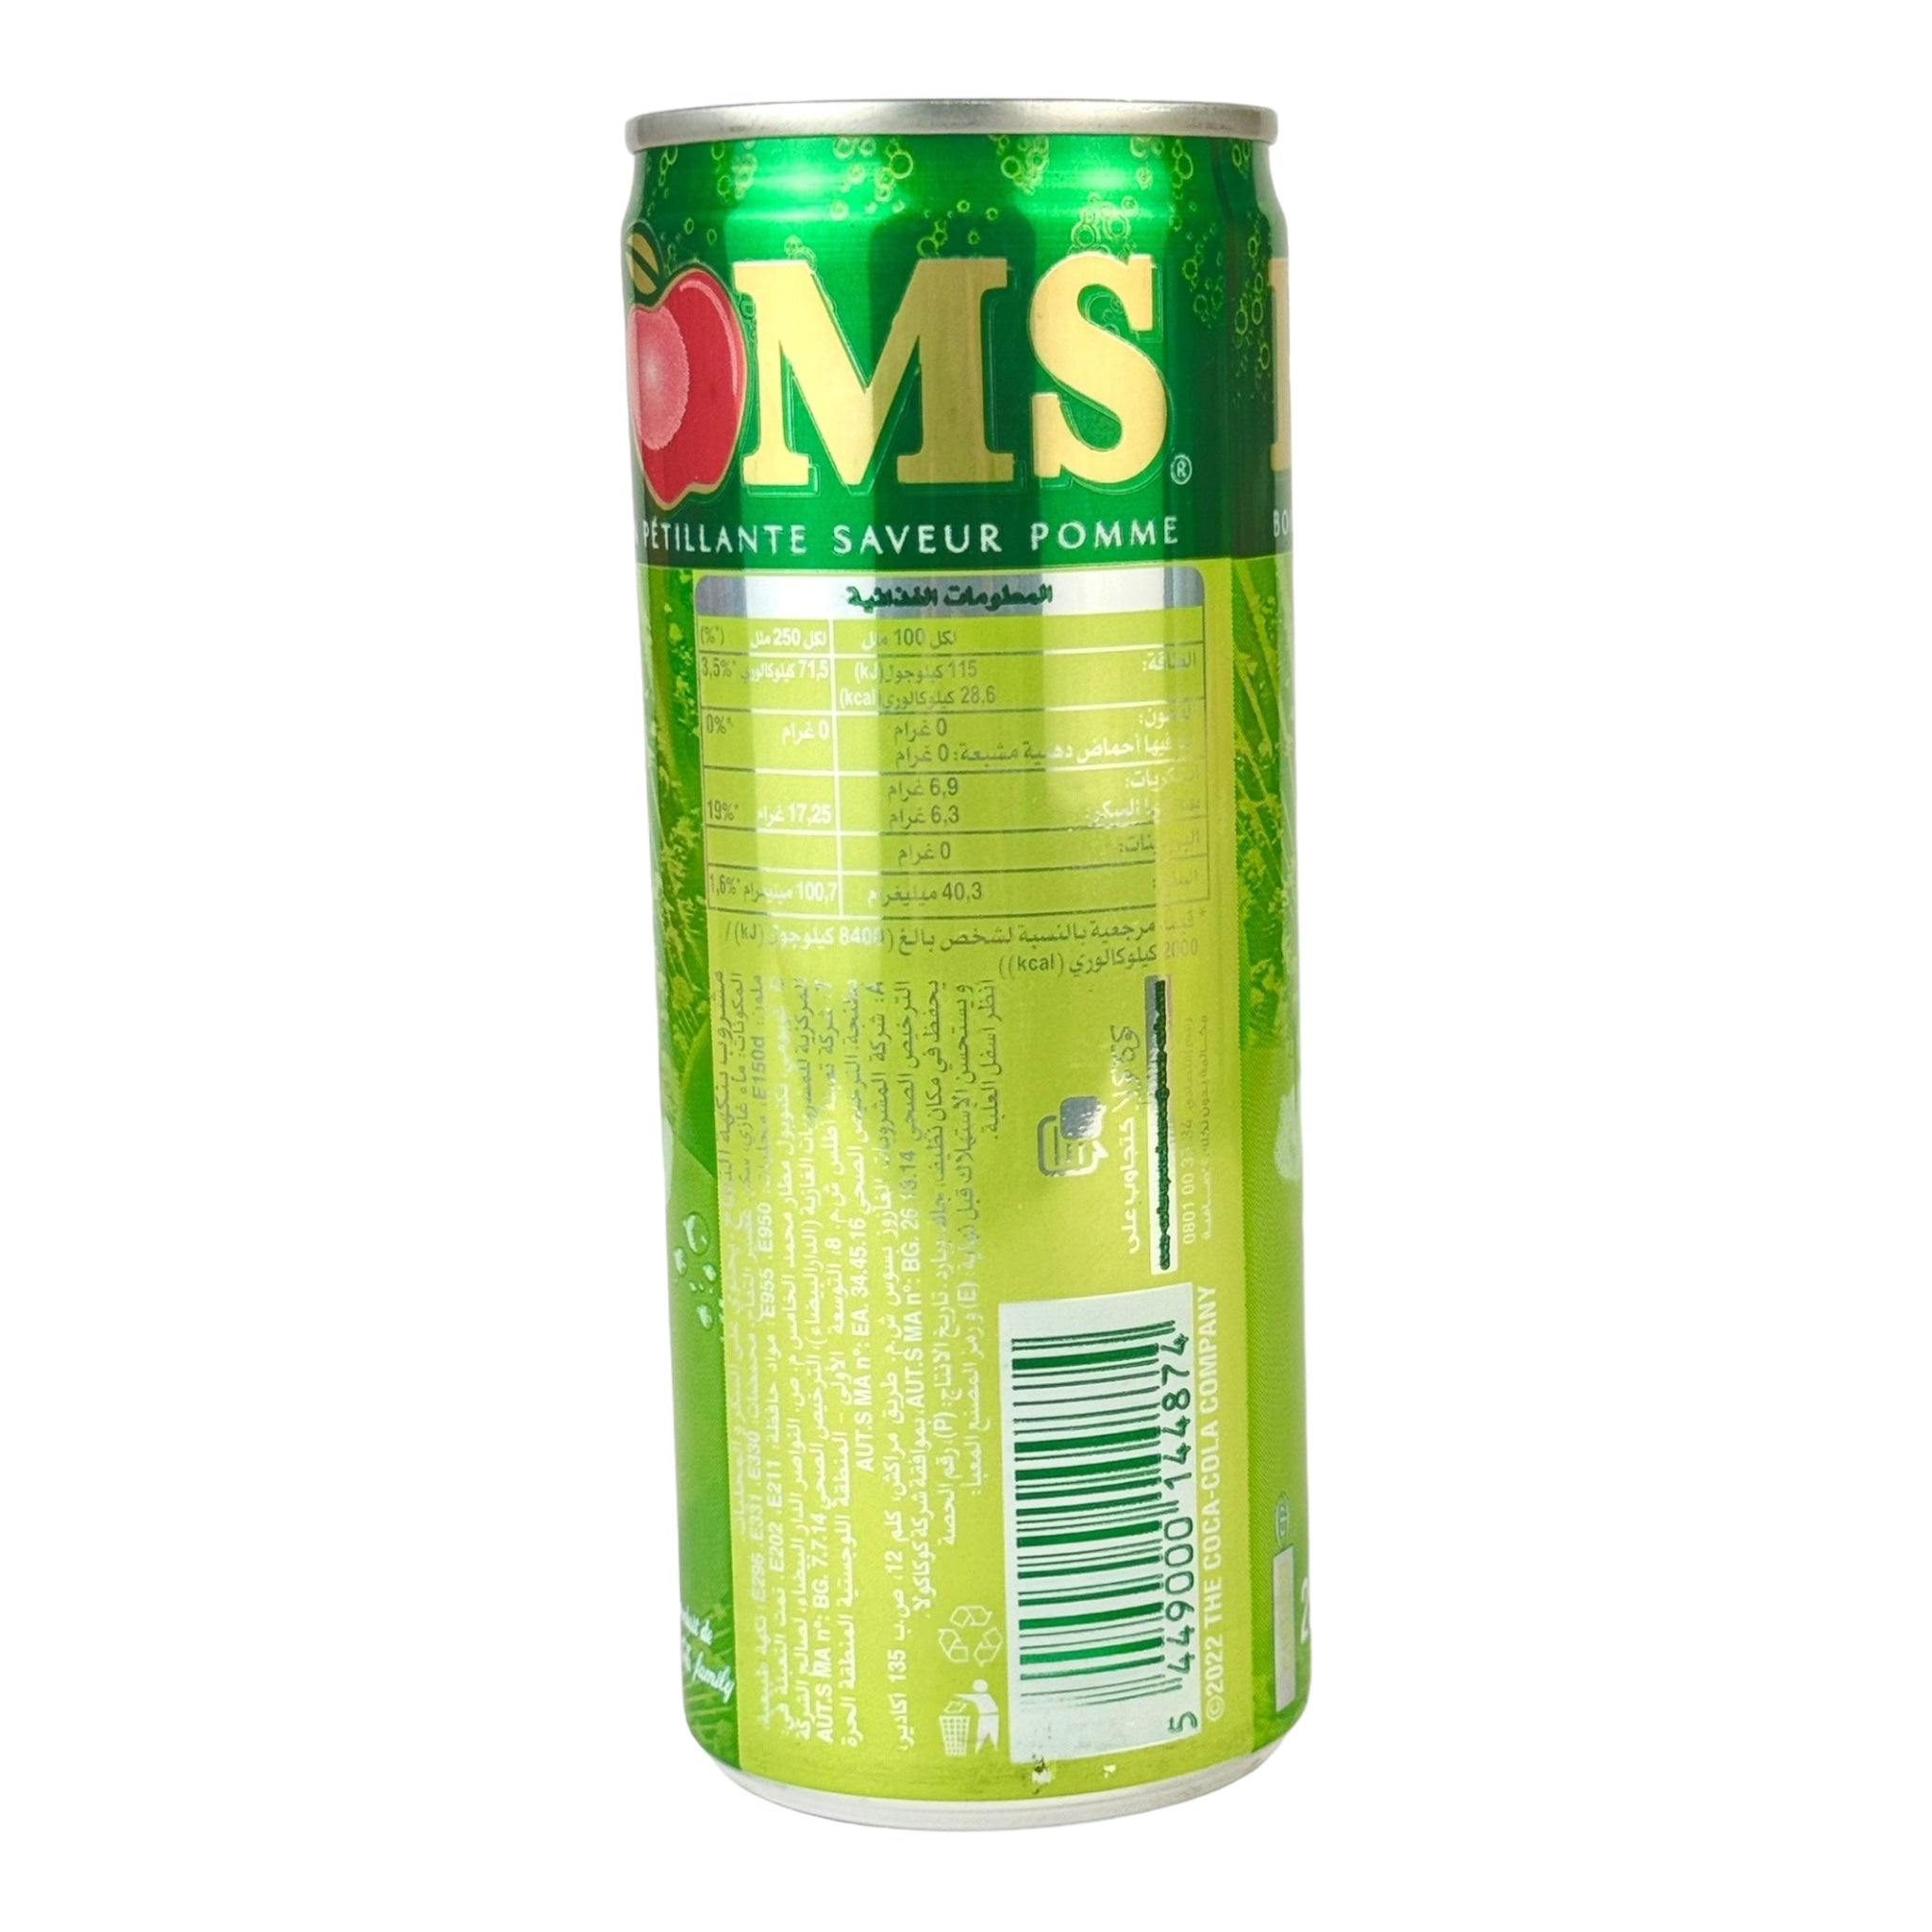 POMS Apple Flavored Soft Drink - A Moroccan Soda